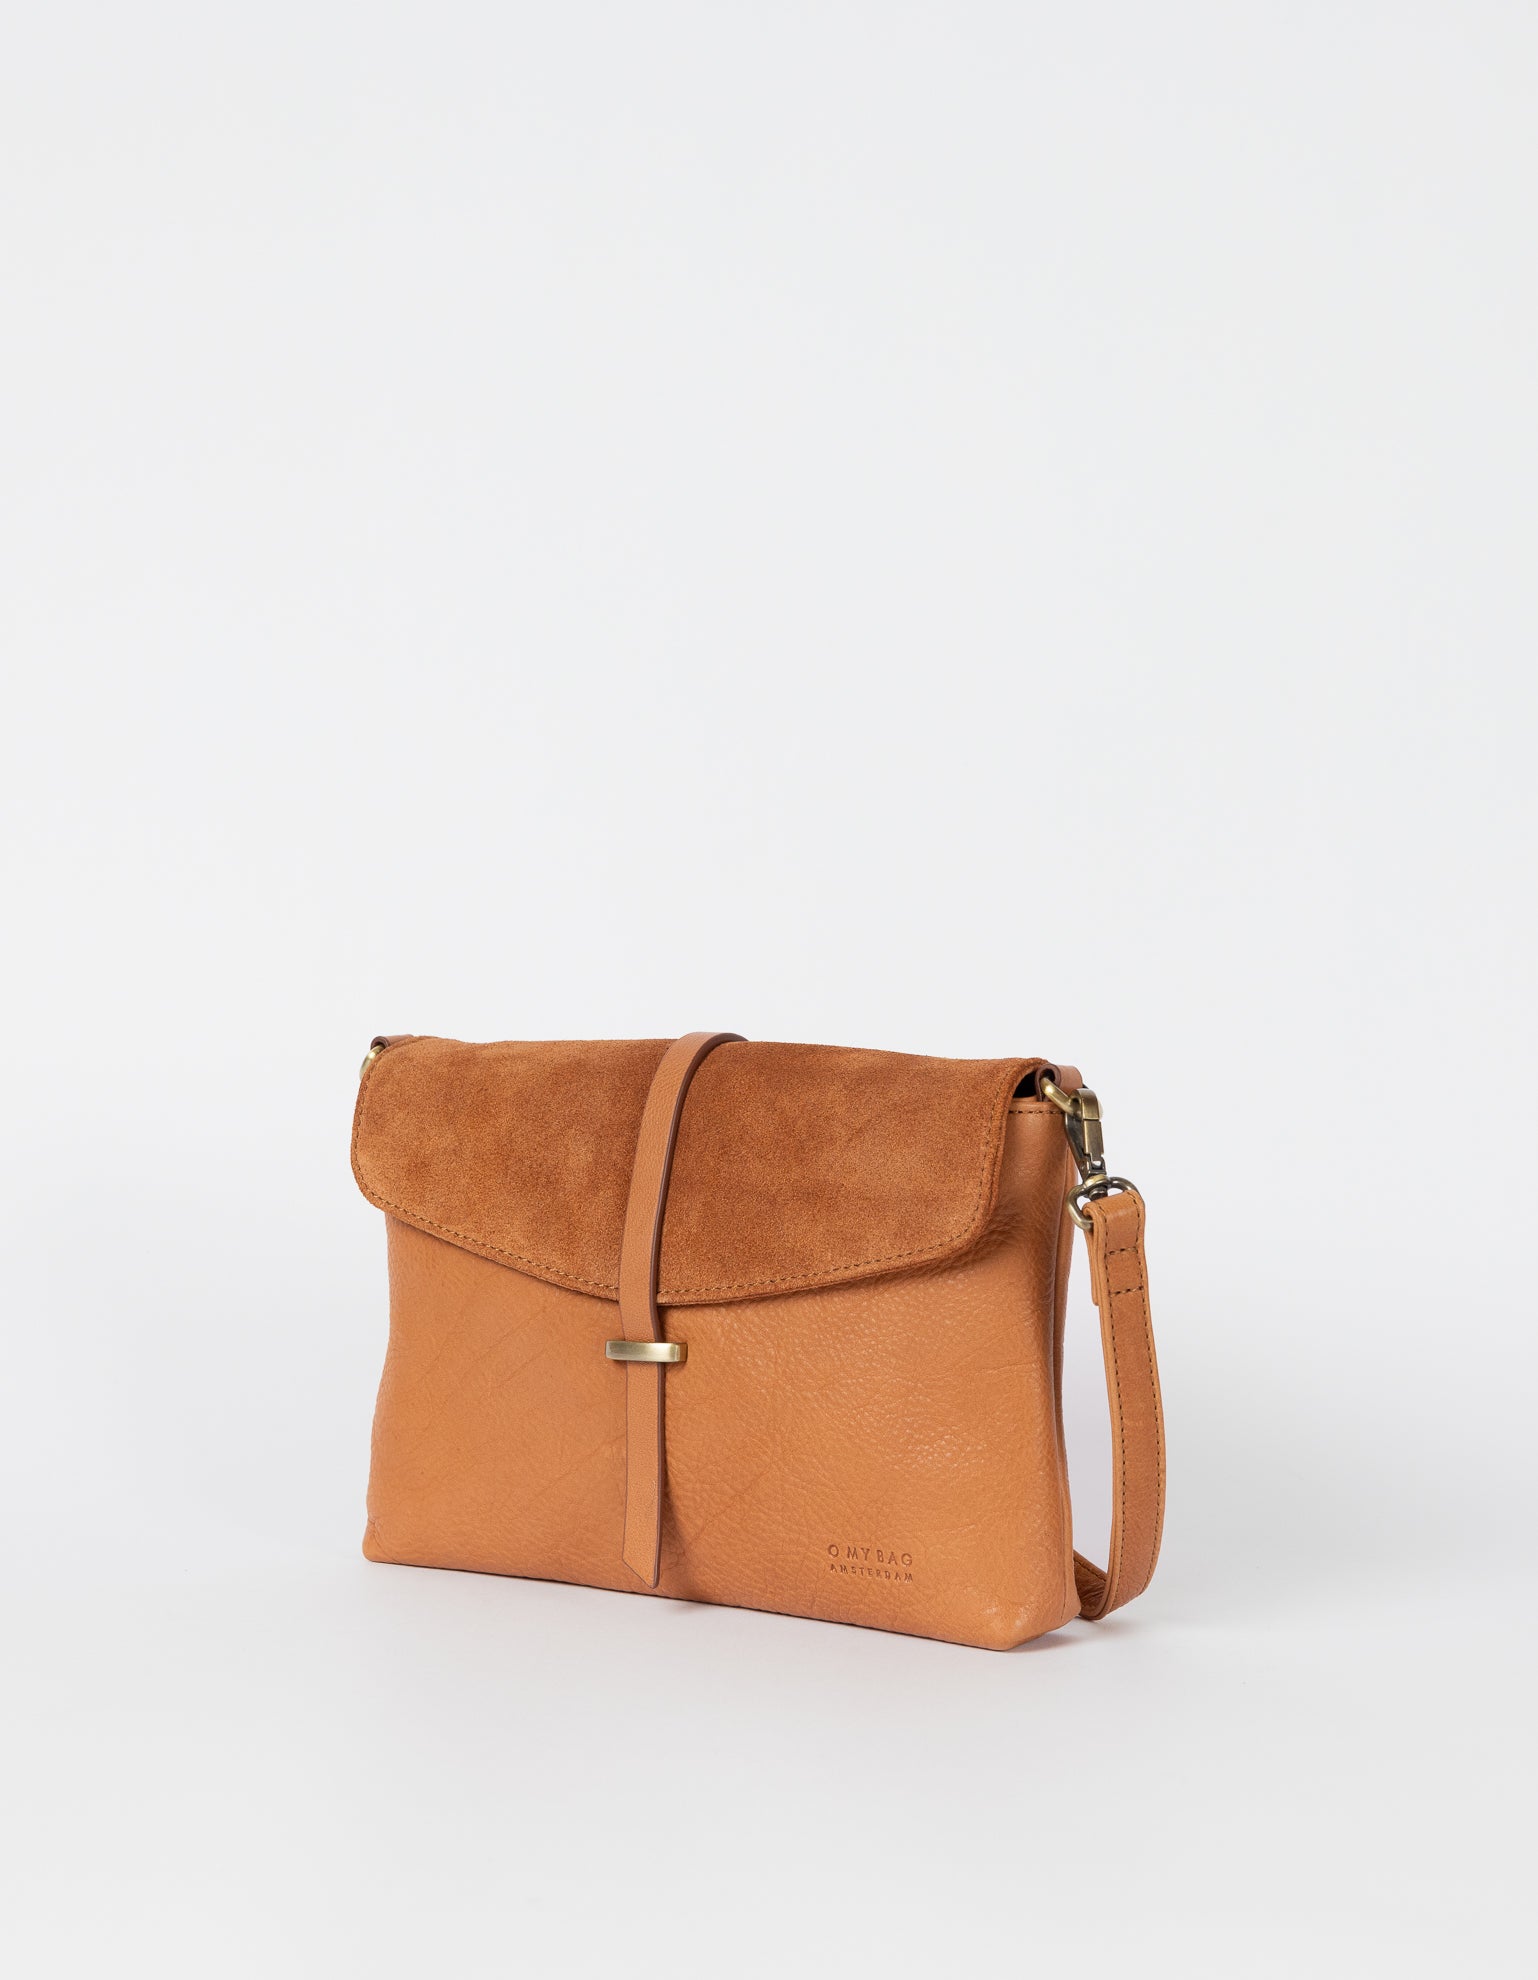 Wild Oak Soft Grain & Suede leather womens handbag. Square shape with an adjustable strap. Side product image